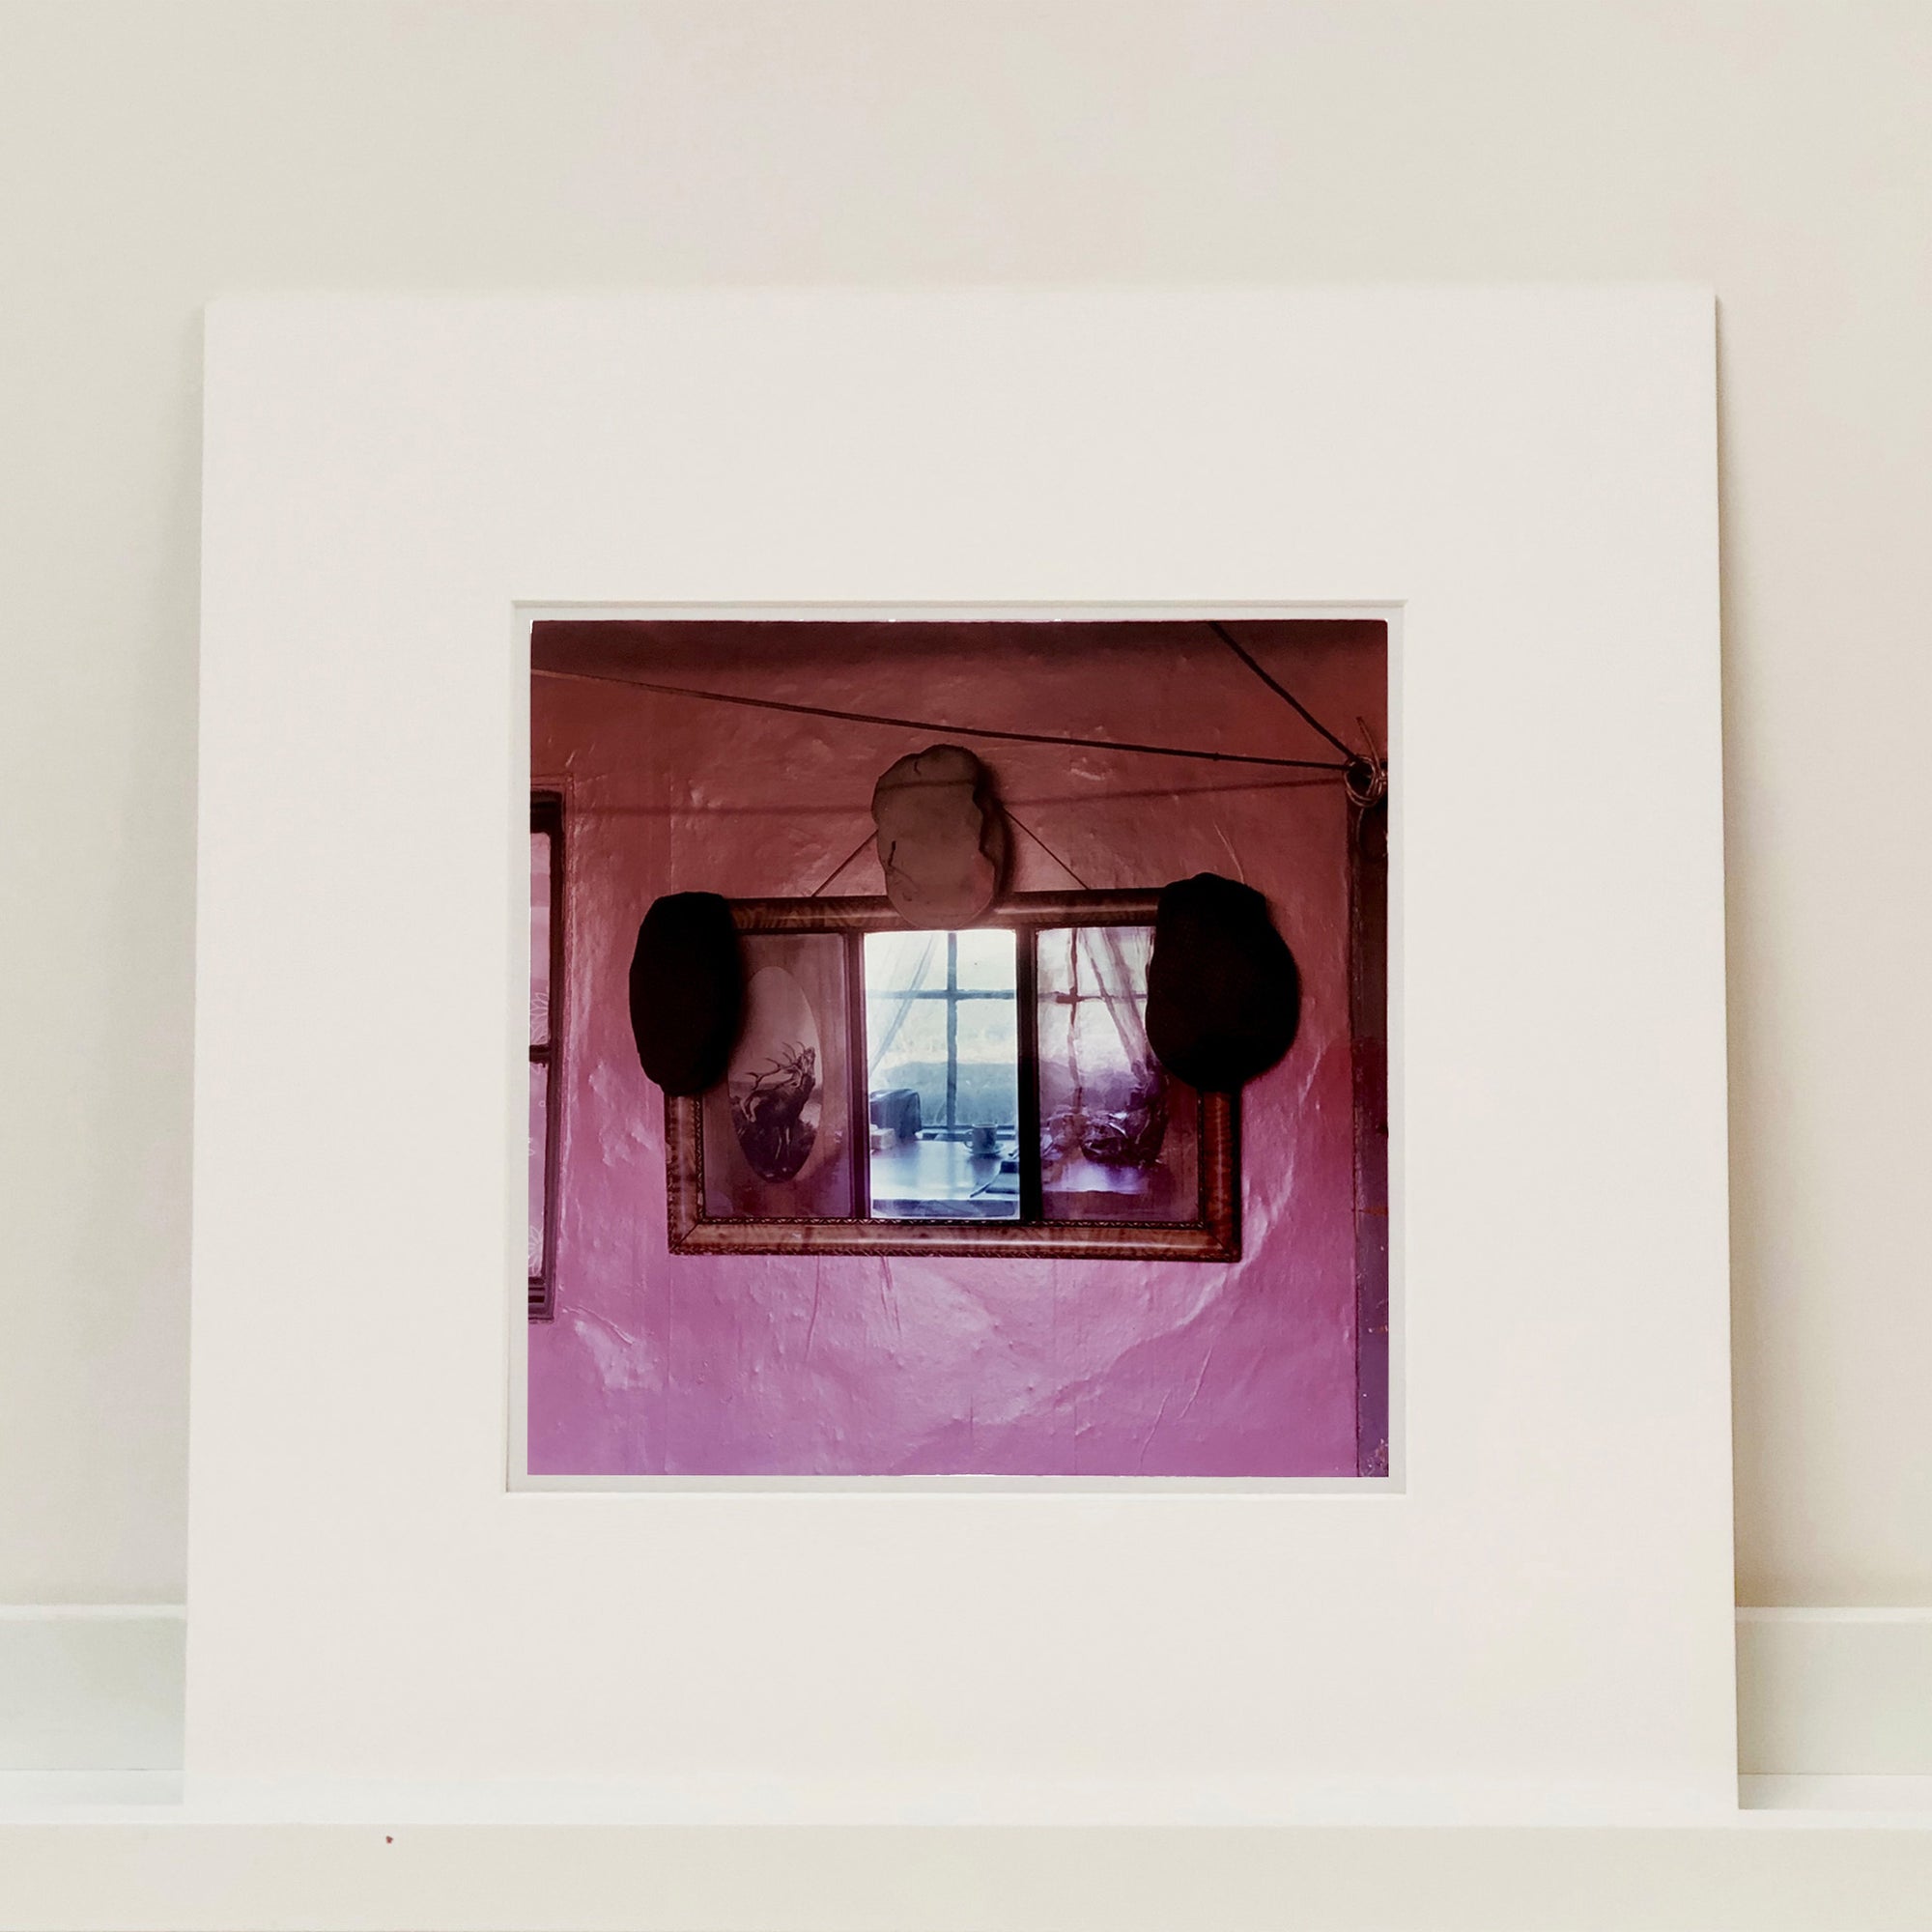 Photograph by Richard Heeps. The fenland landscape reflects beyond the room in the mirror on the pink cottage wall adorned by three flat caps